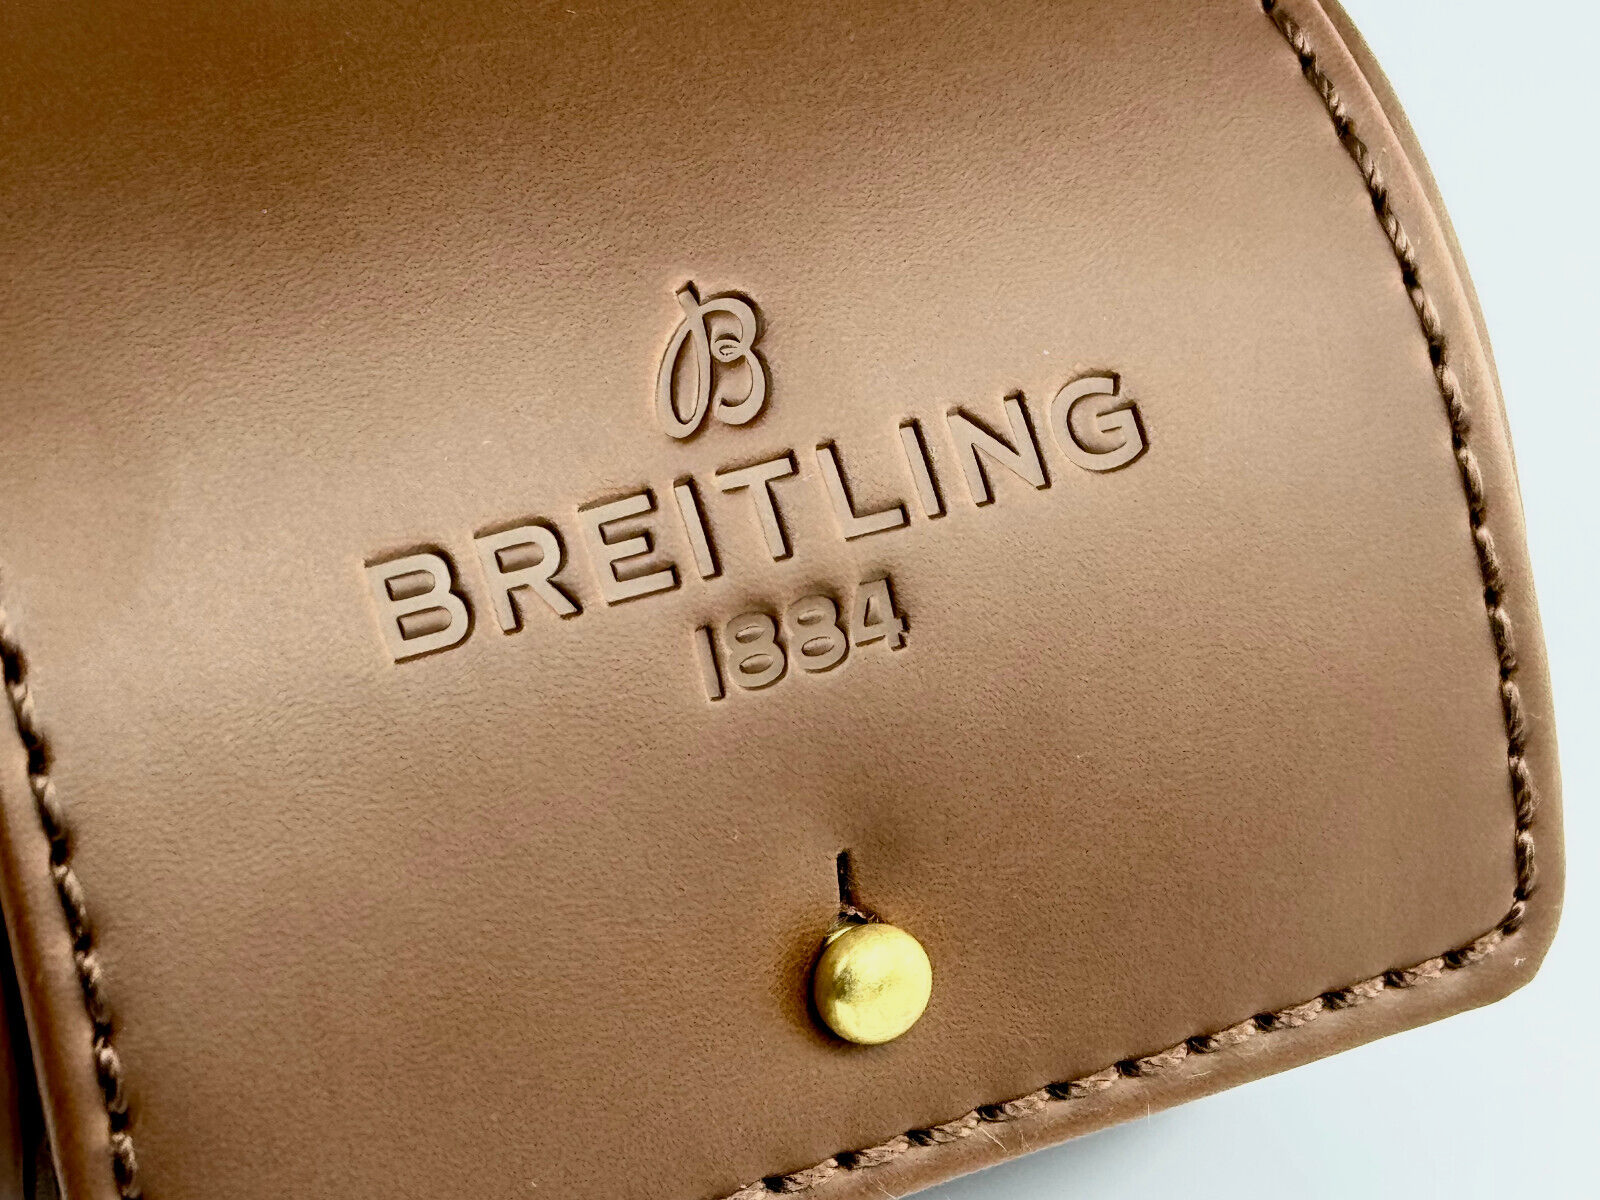 Breitling Leather Watch Case Brown 